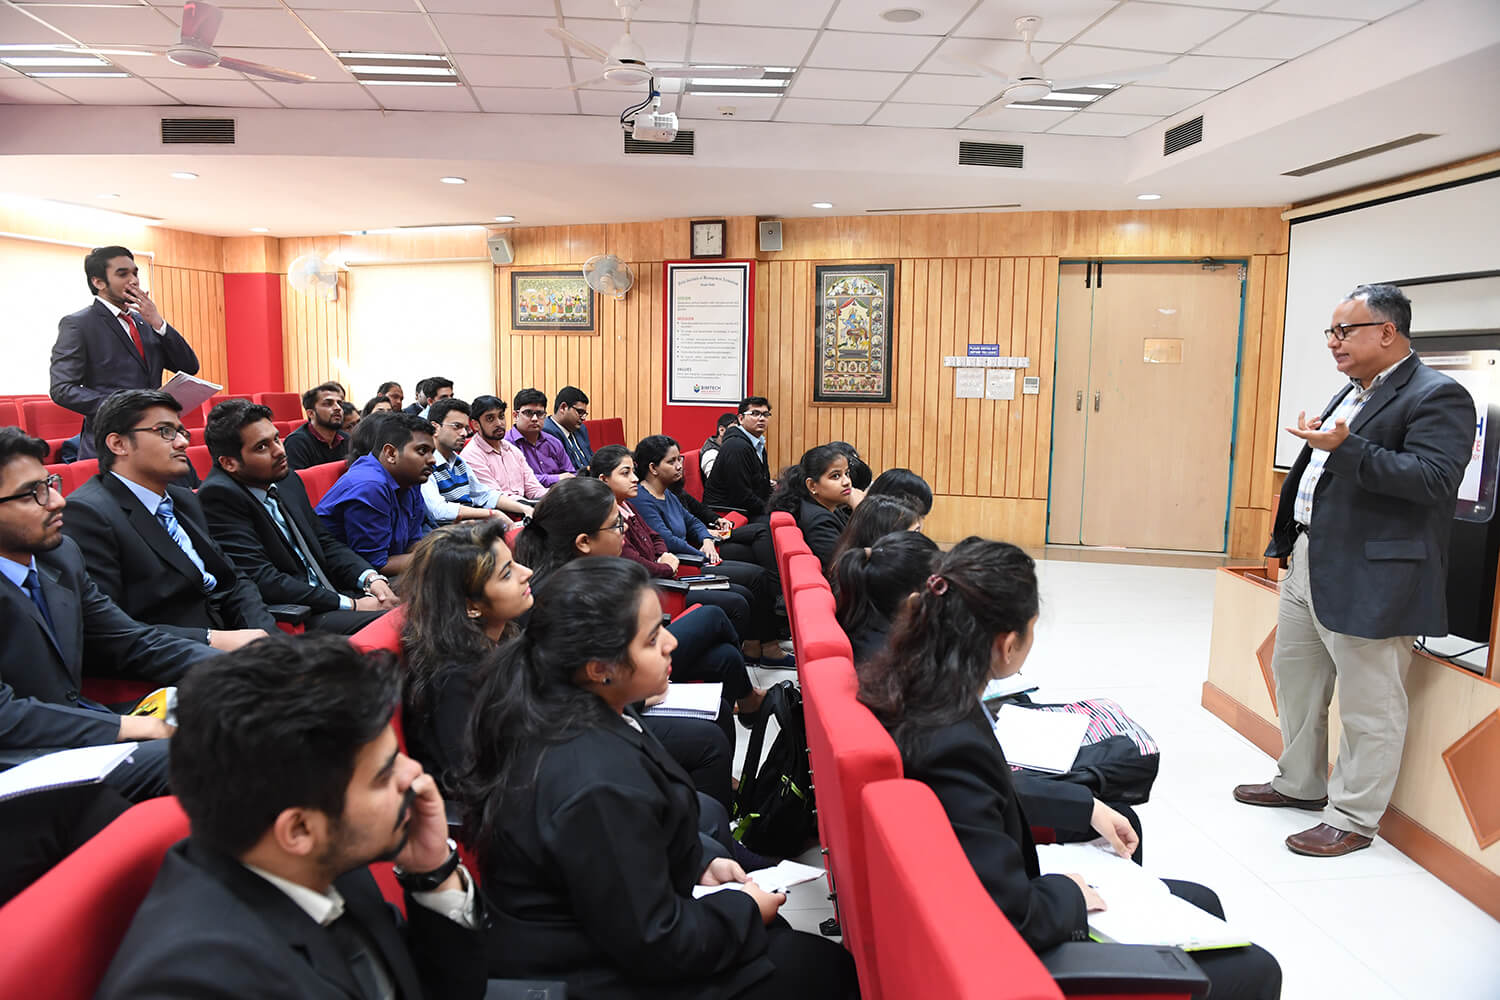 Mr Sanjay Datta, Guest Lecture